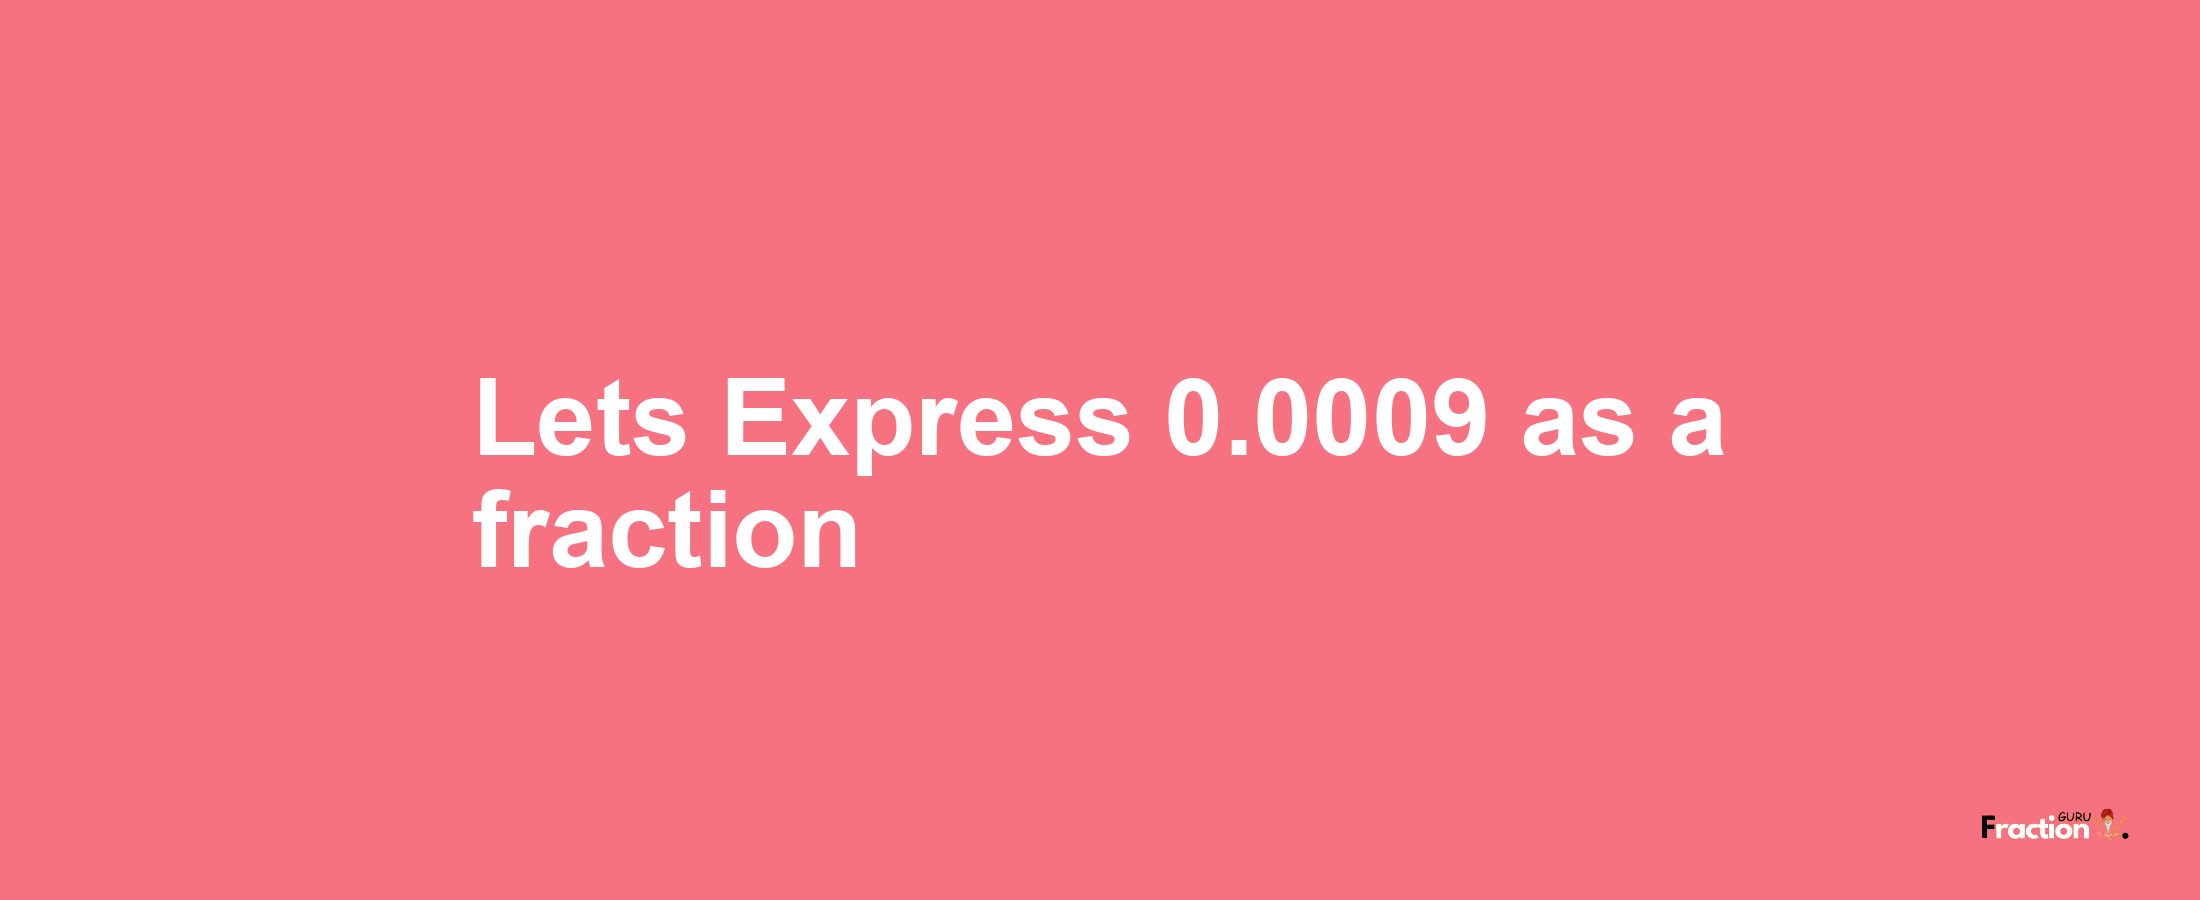 Lets Express 0.0009 as afraction